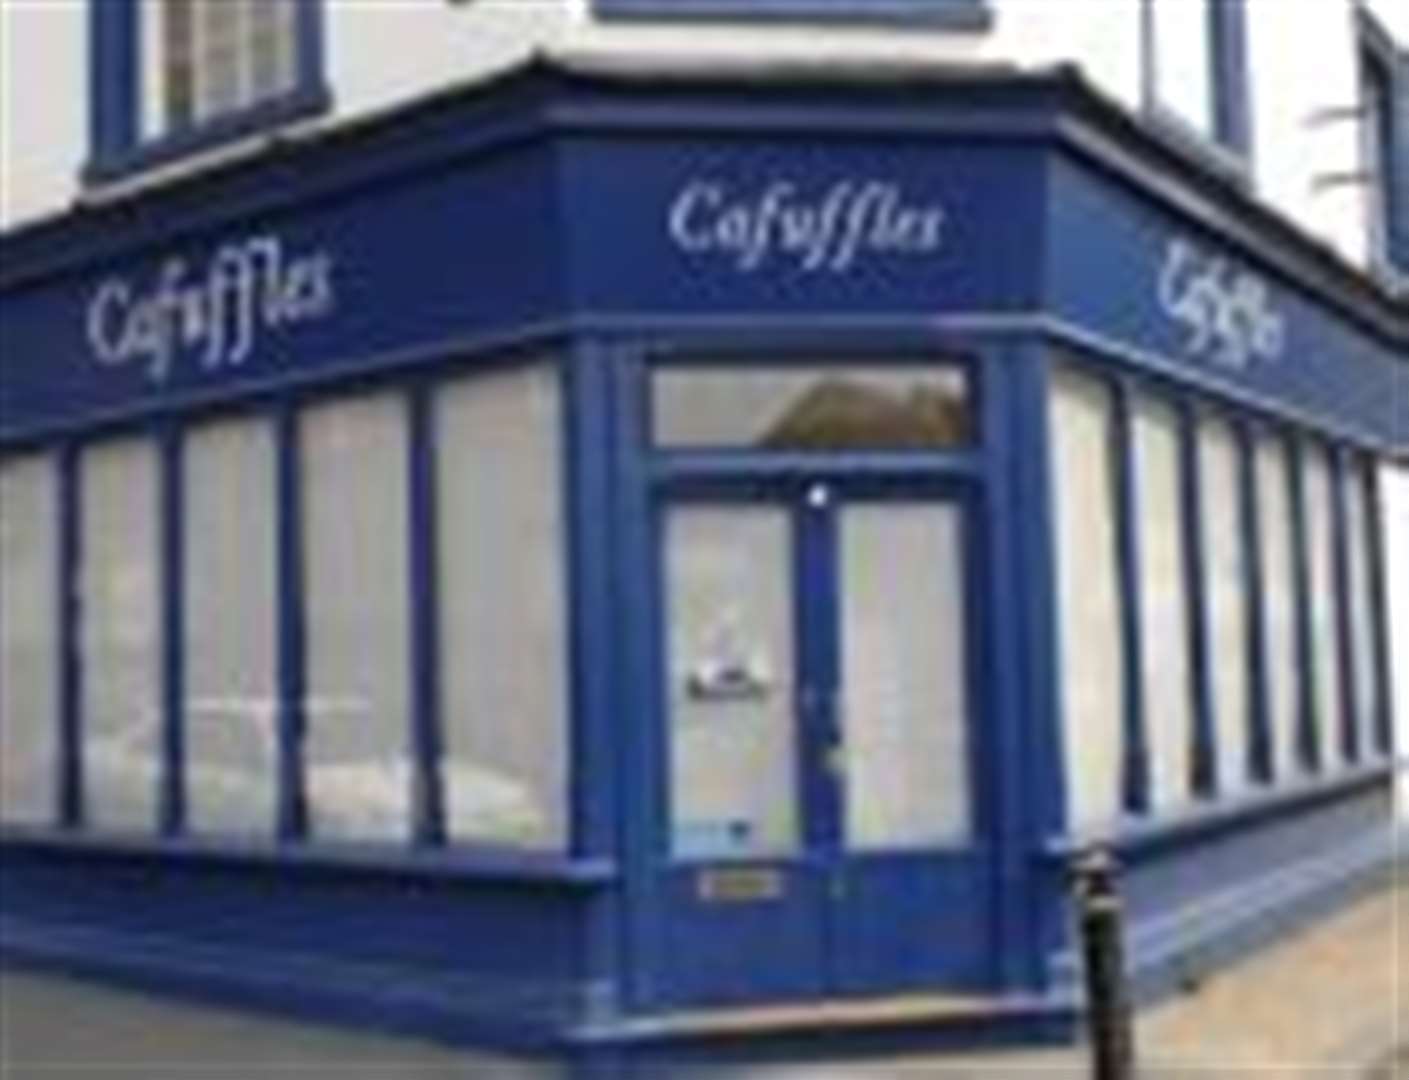 New lease of life for closed cafe